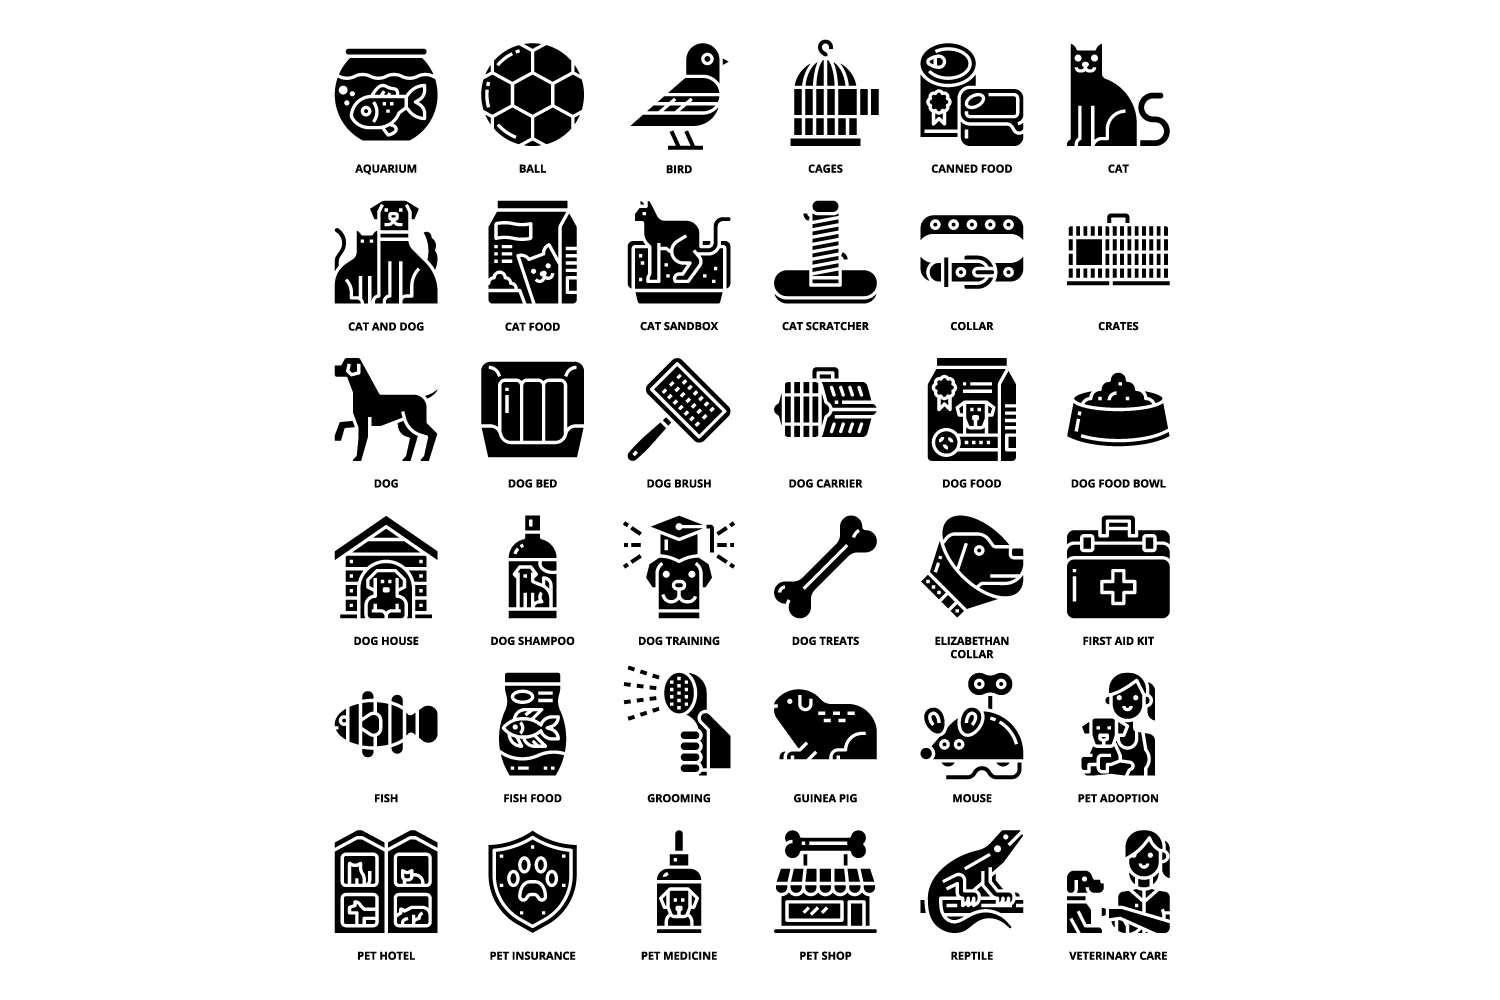 Black and white image of a set of icons.